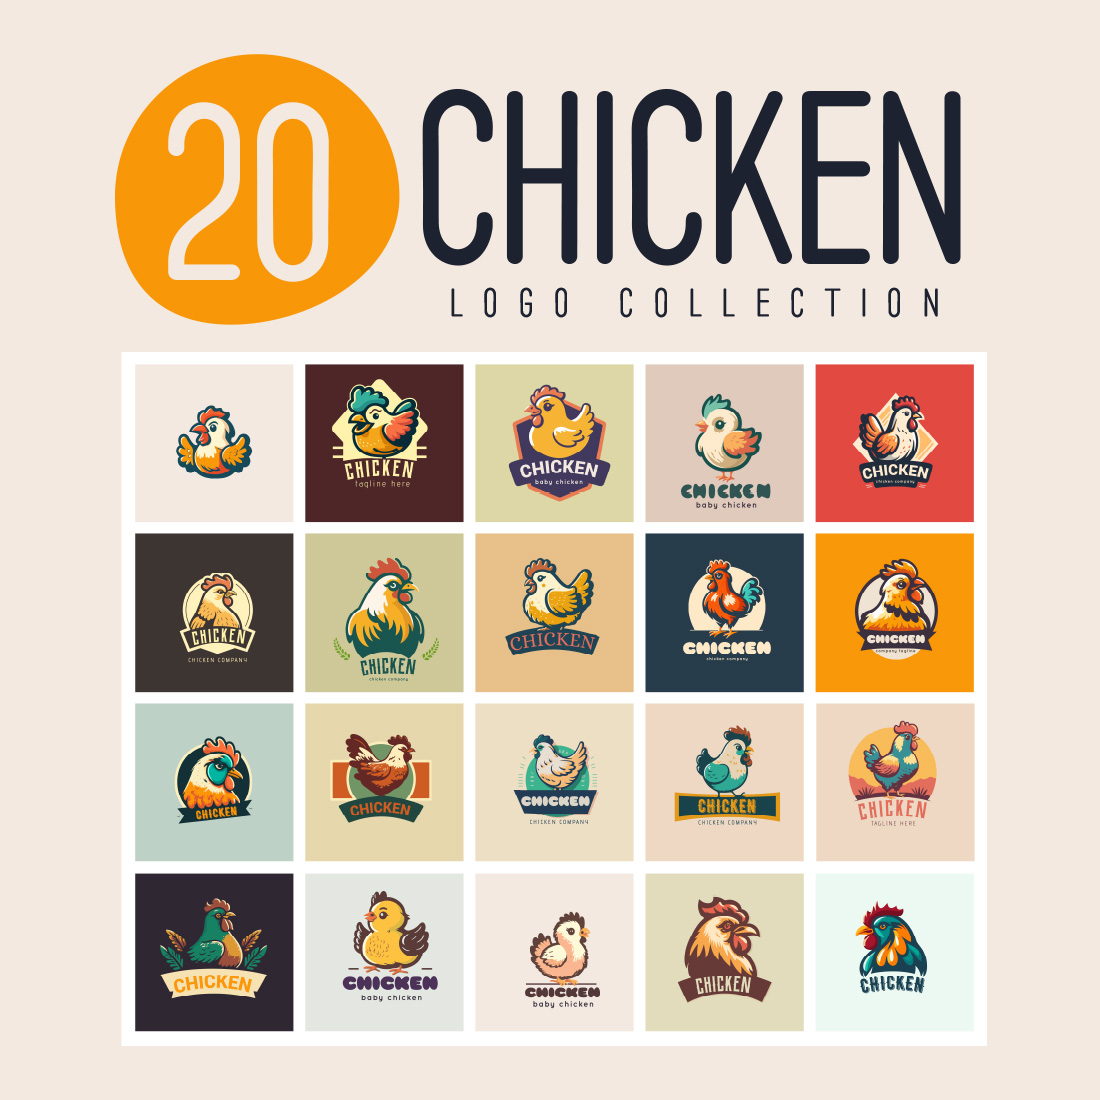 Chicken Rooster Logo Mascot Design cover image.